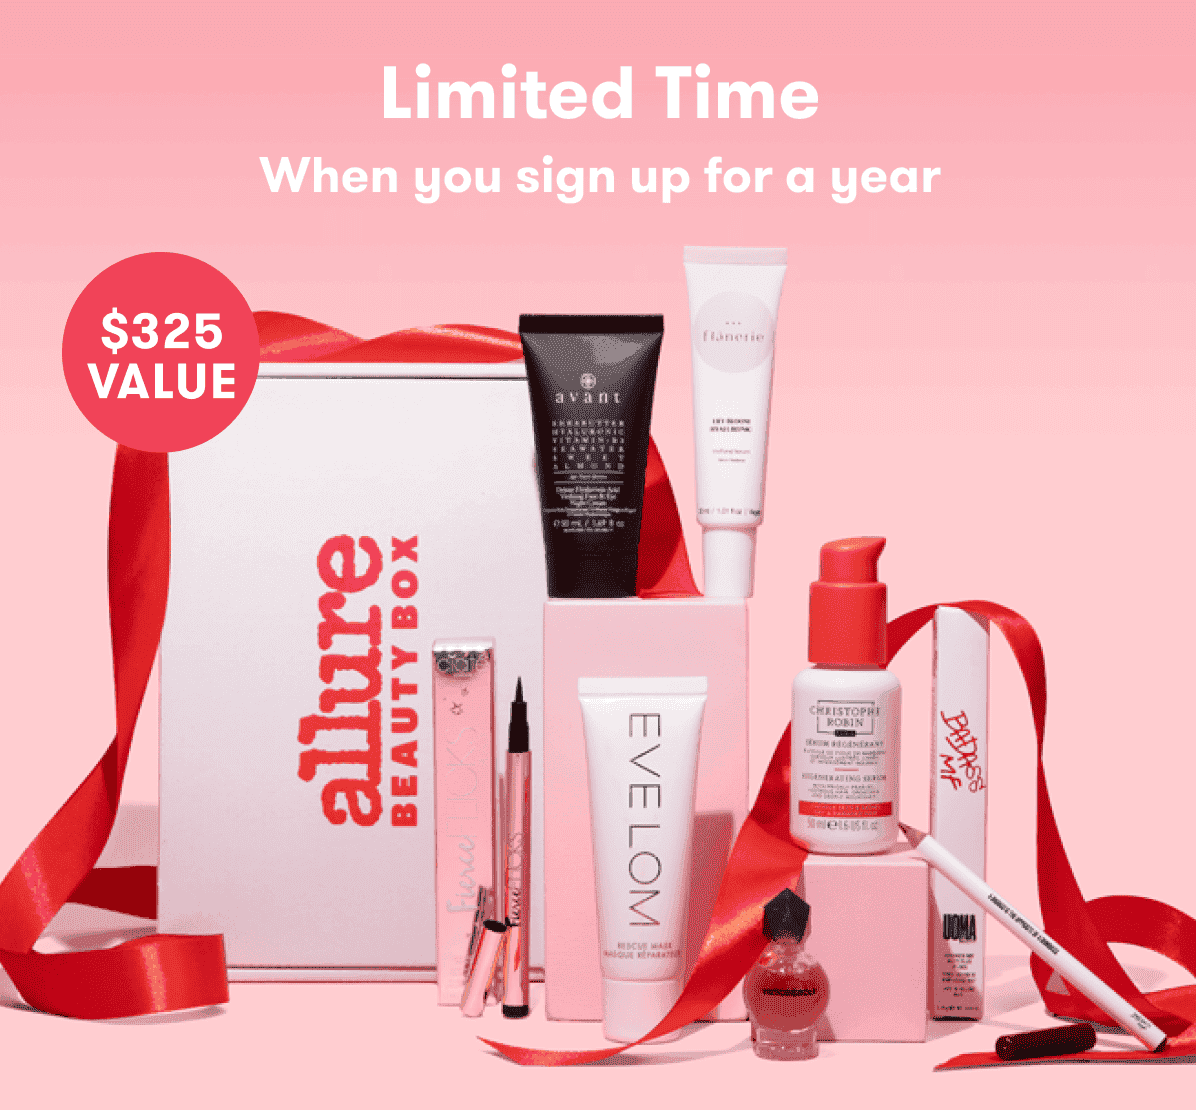 \\$325 Value. Limited-Time. When you sign up for a year.